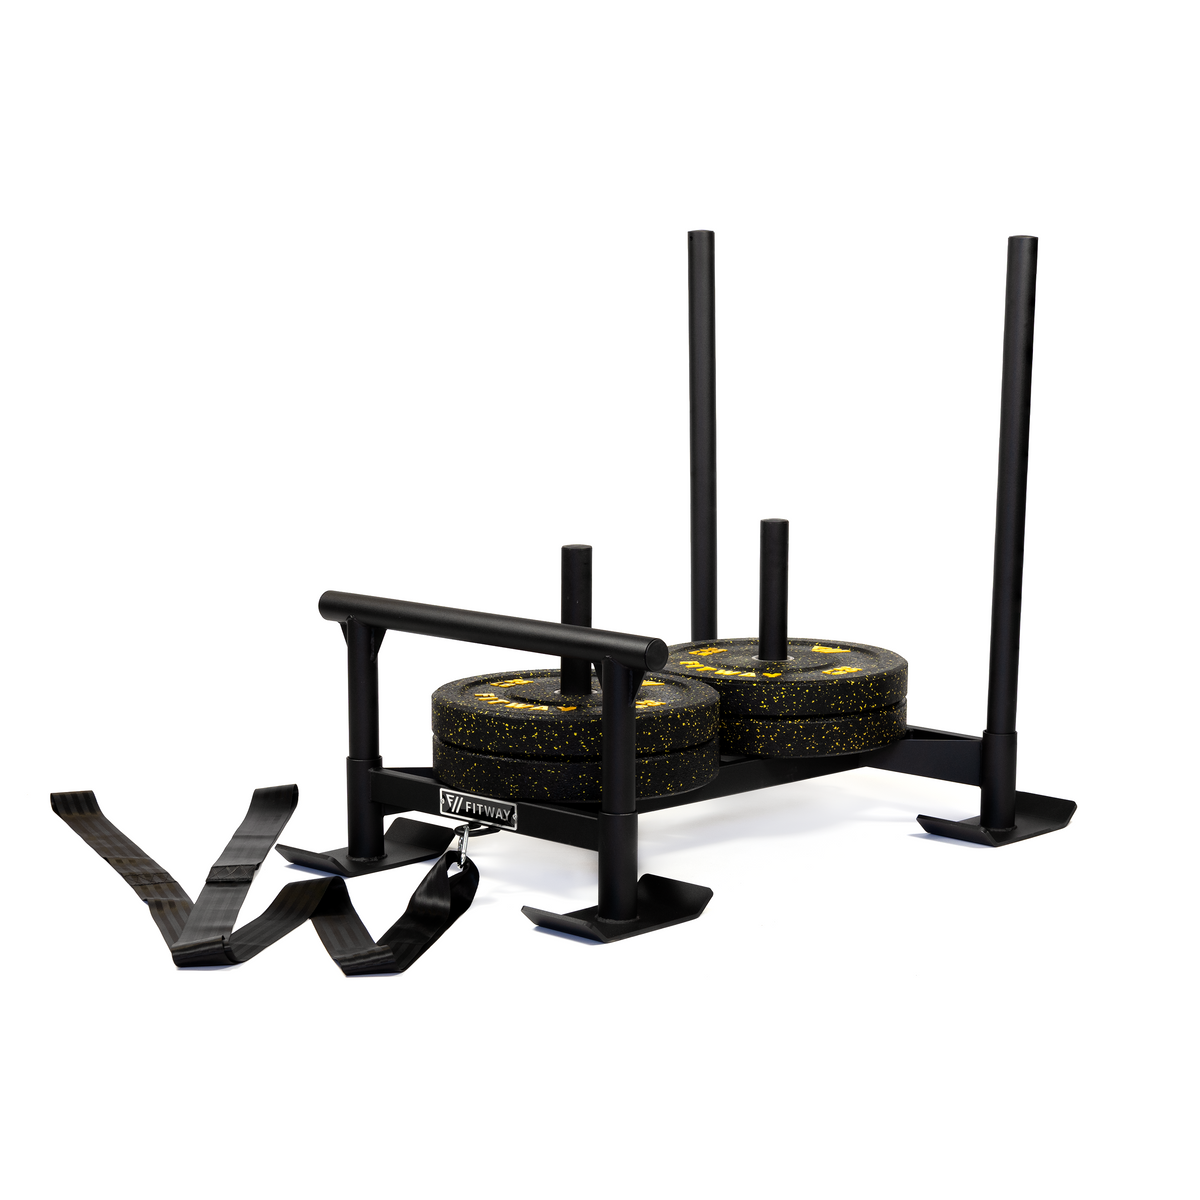 FitWay Equip. Power Sled - Black